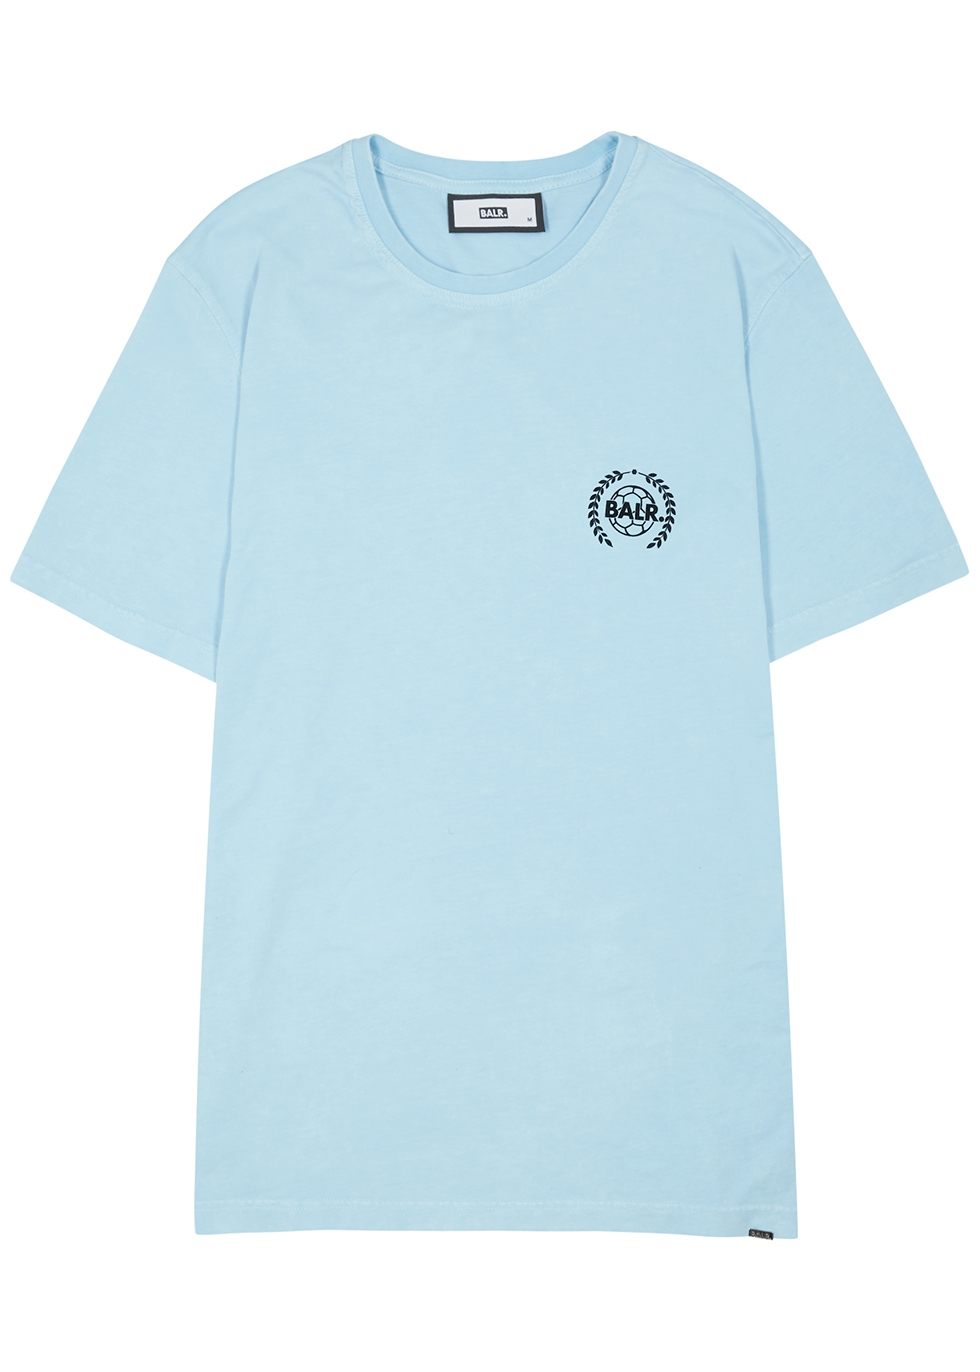 Olaf blue washed cotton T-shirt